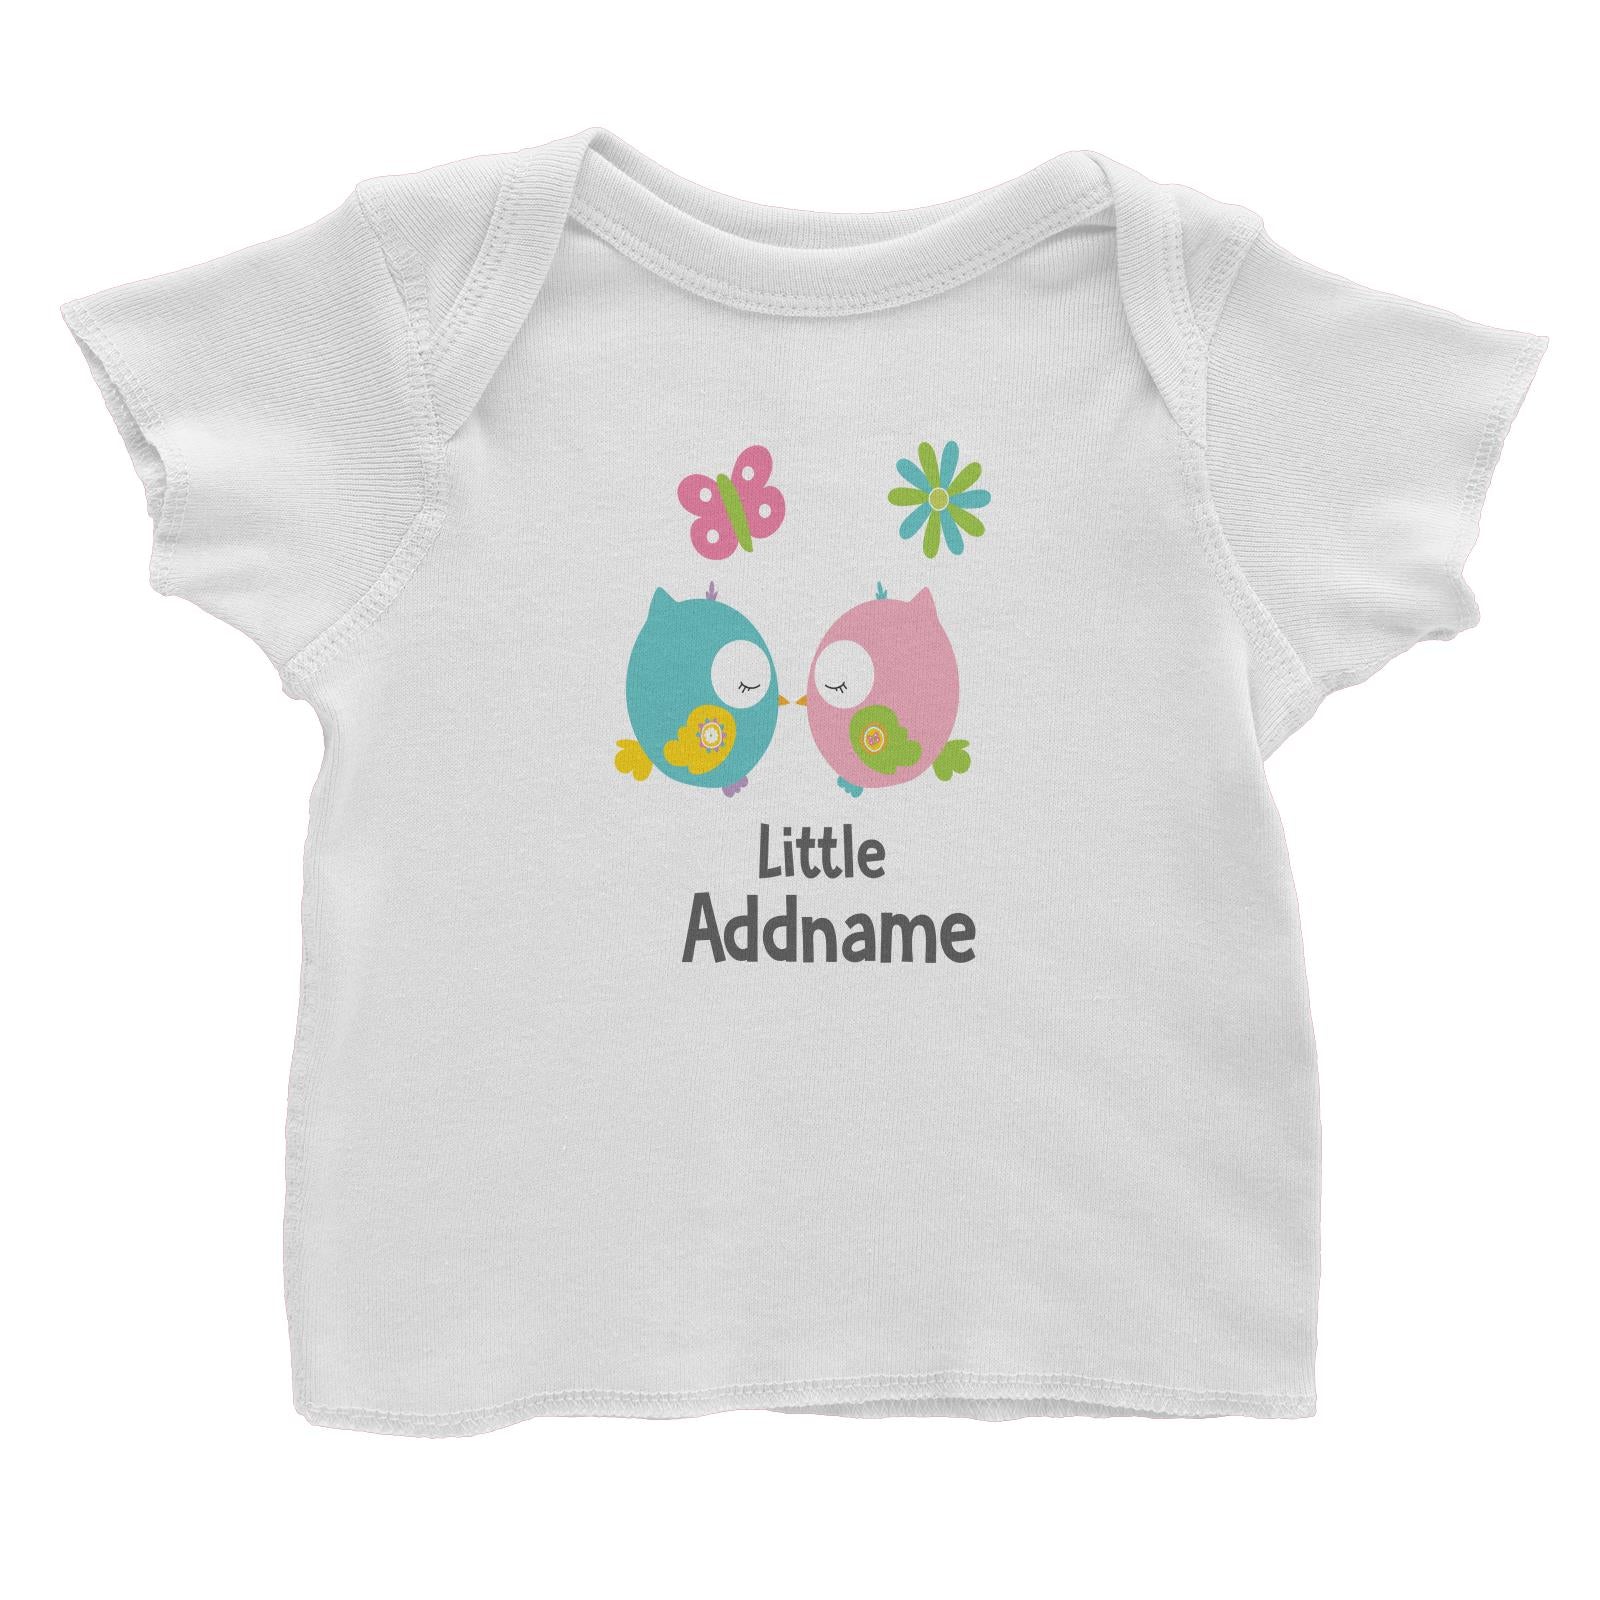 Cute Owls Pair Kissing Little Addname Baby T-Shirt